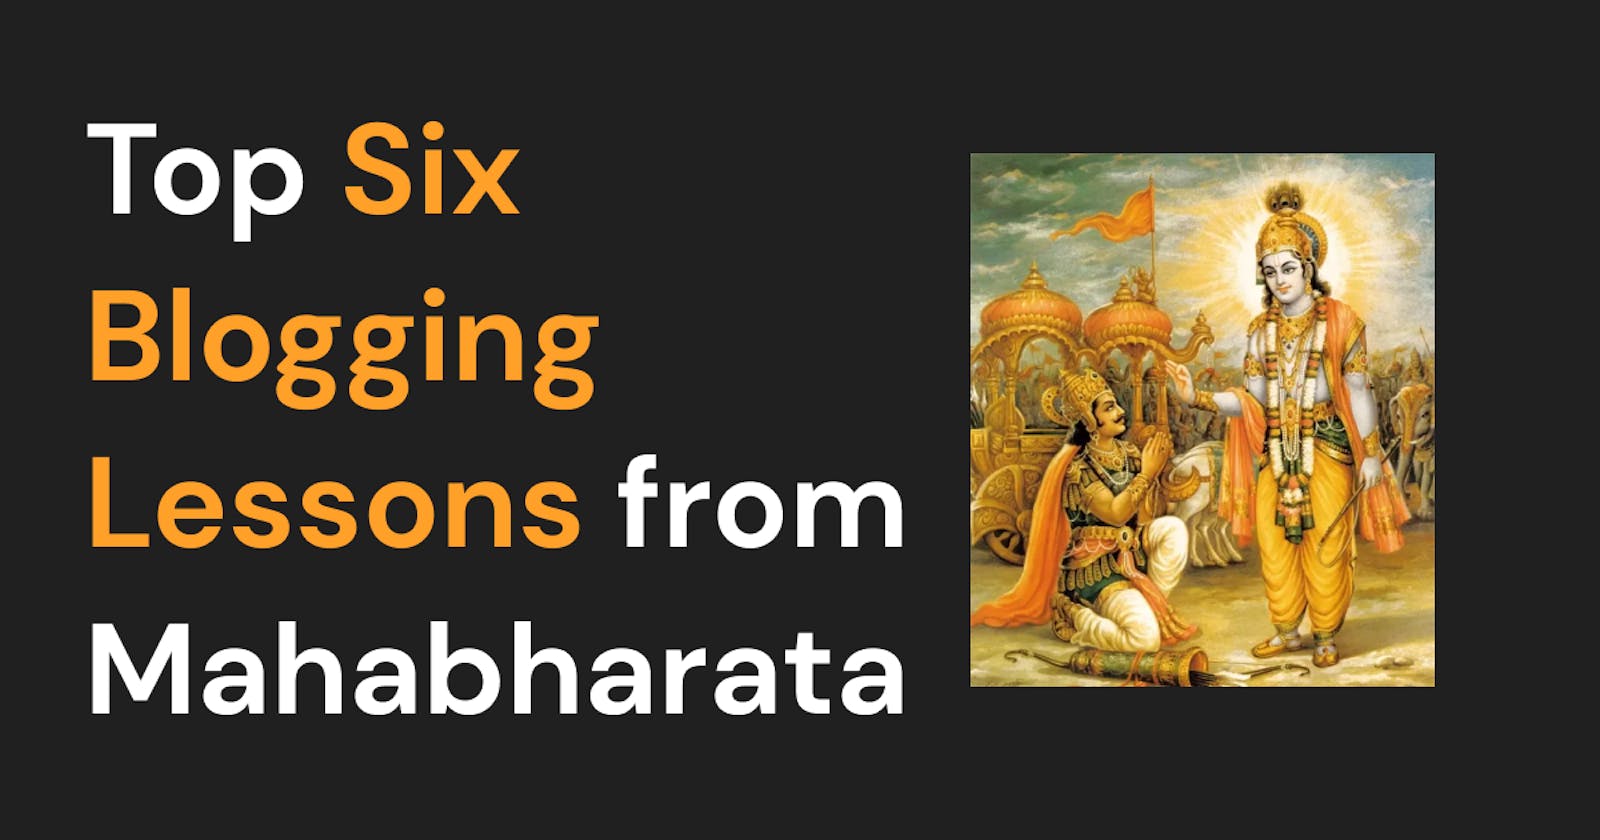 Top 6 blogging lessons from Mahabharata